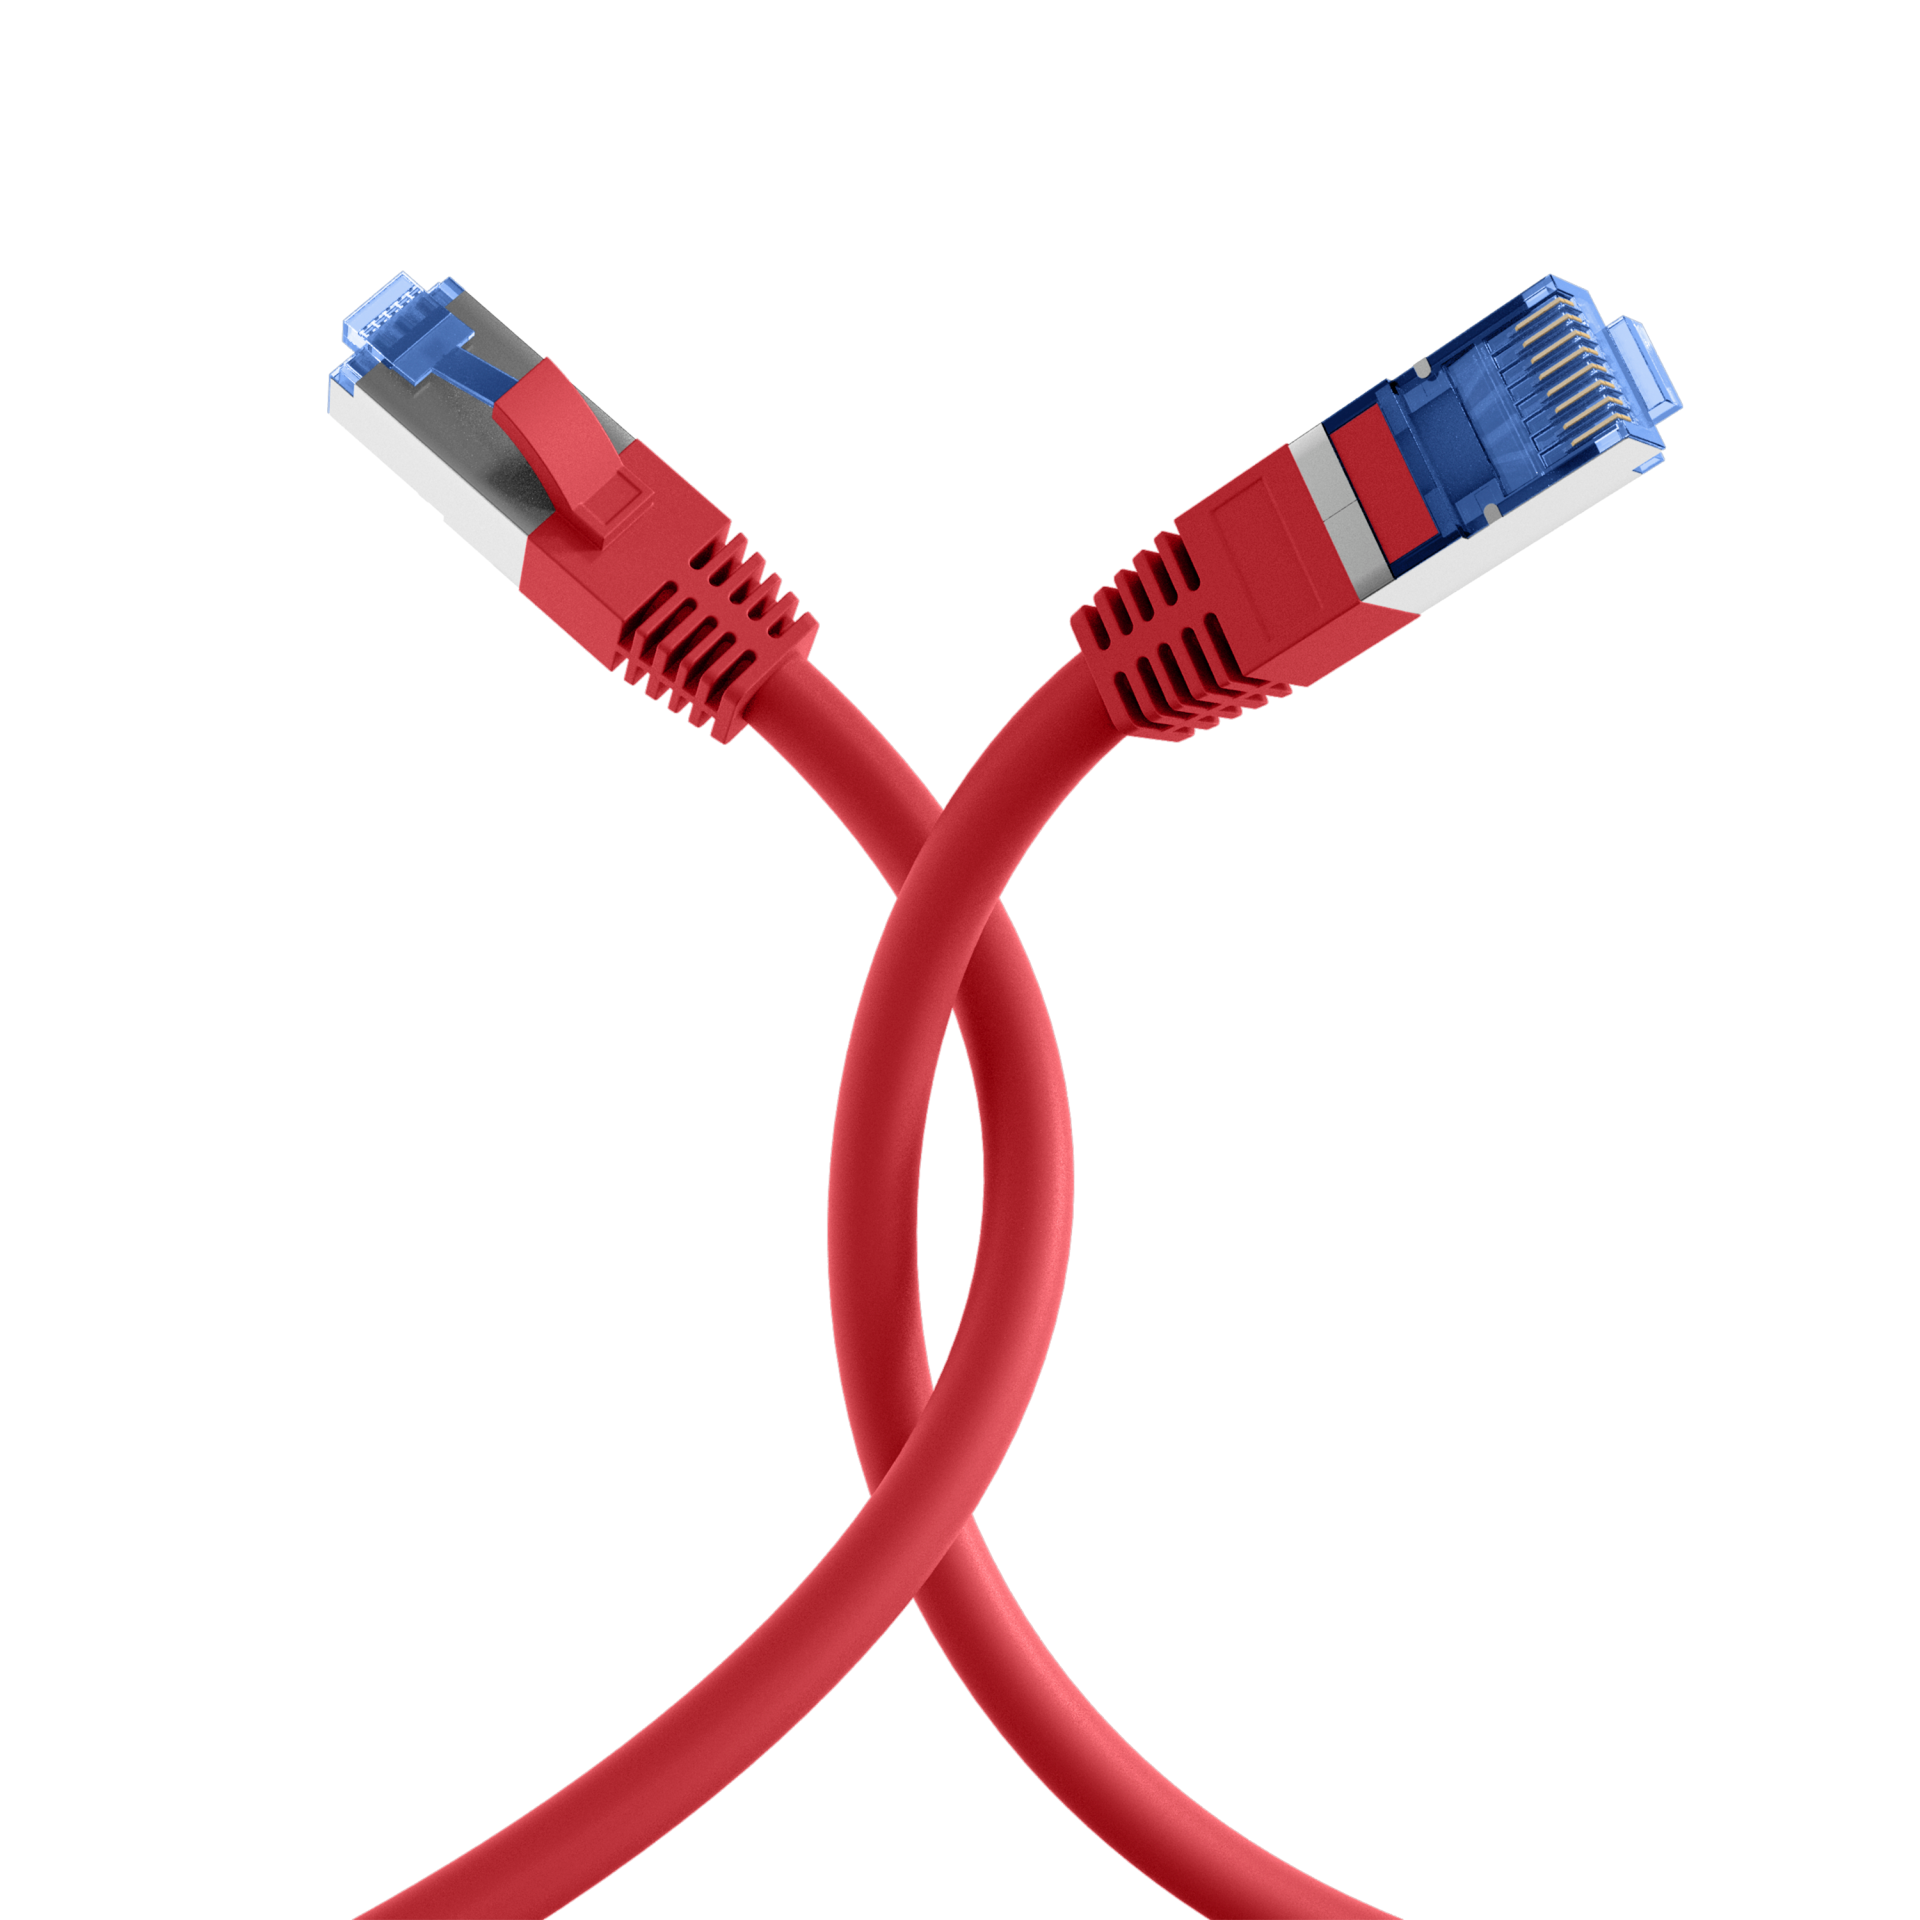 RJ45 Patch Cord Cat.6A S/FTP TPE Cat.7 raw cable superflex red 20m